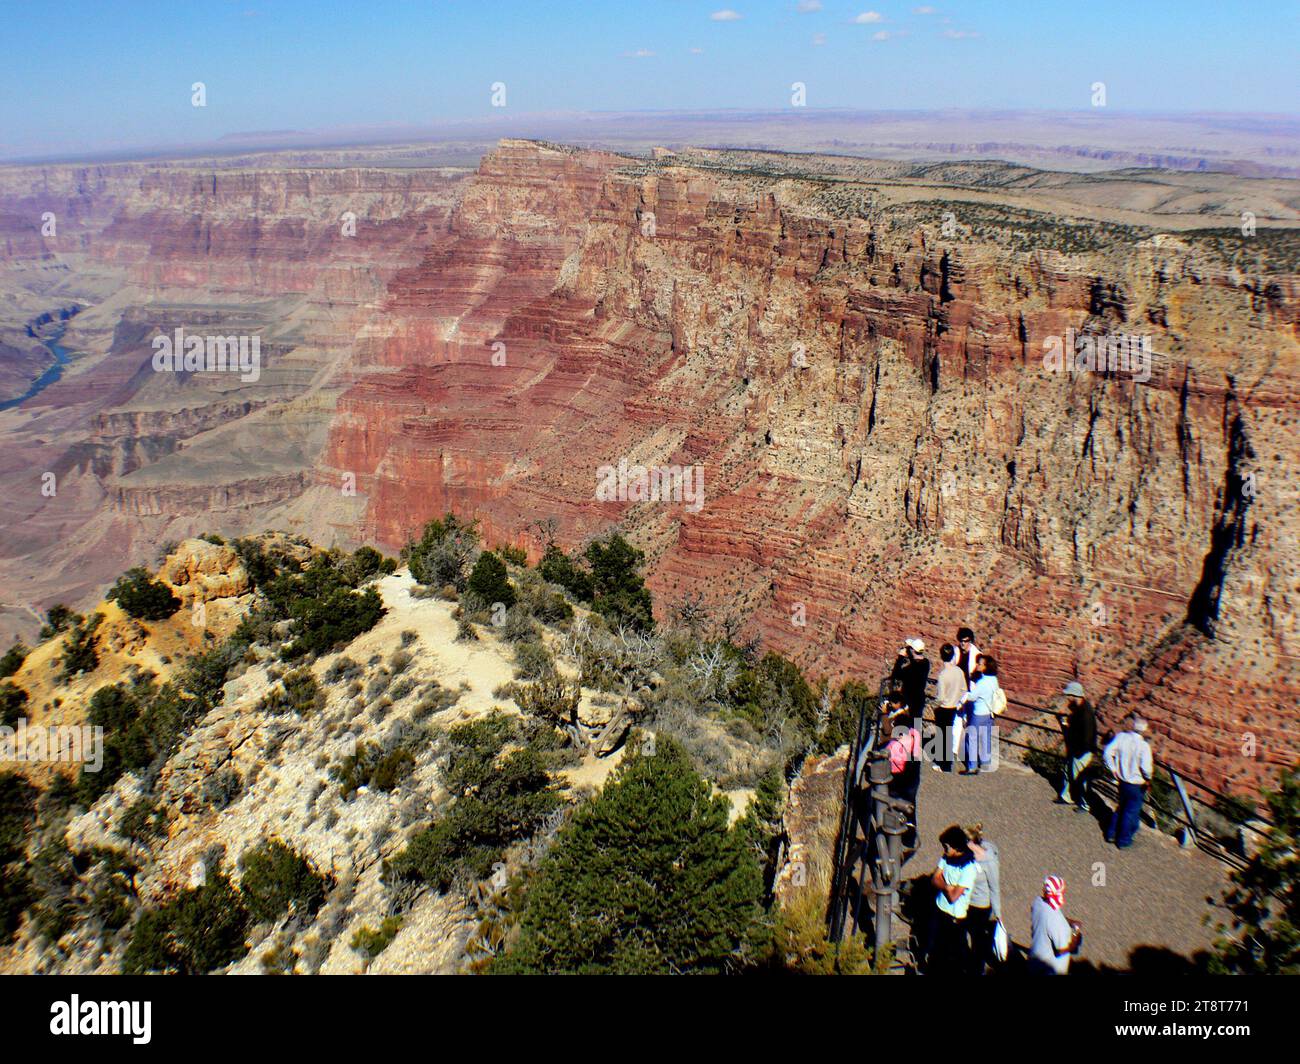 The Grand Canyon, All at once an immense gorge a mile deep and up to 18 miles wide opens up. The scale is so vast that even from the best vantage point only a fraction of the canyon's 277 miles can be seen Stock Photo